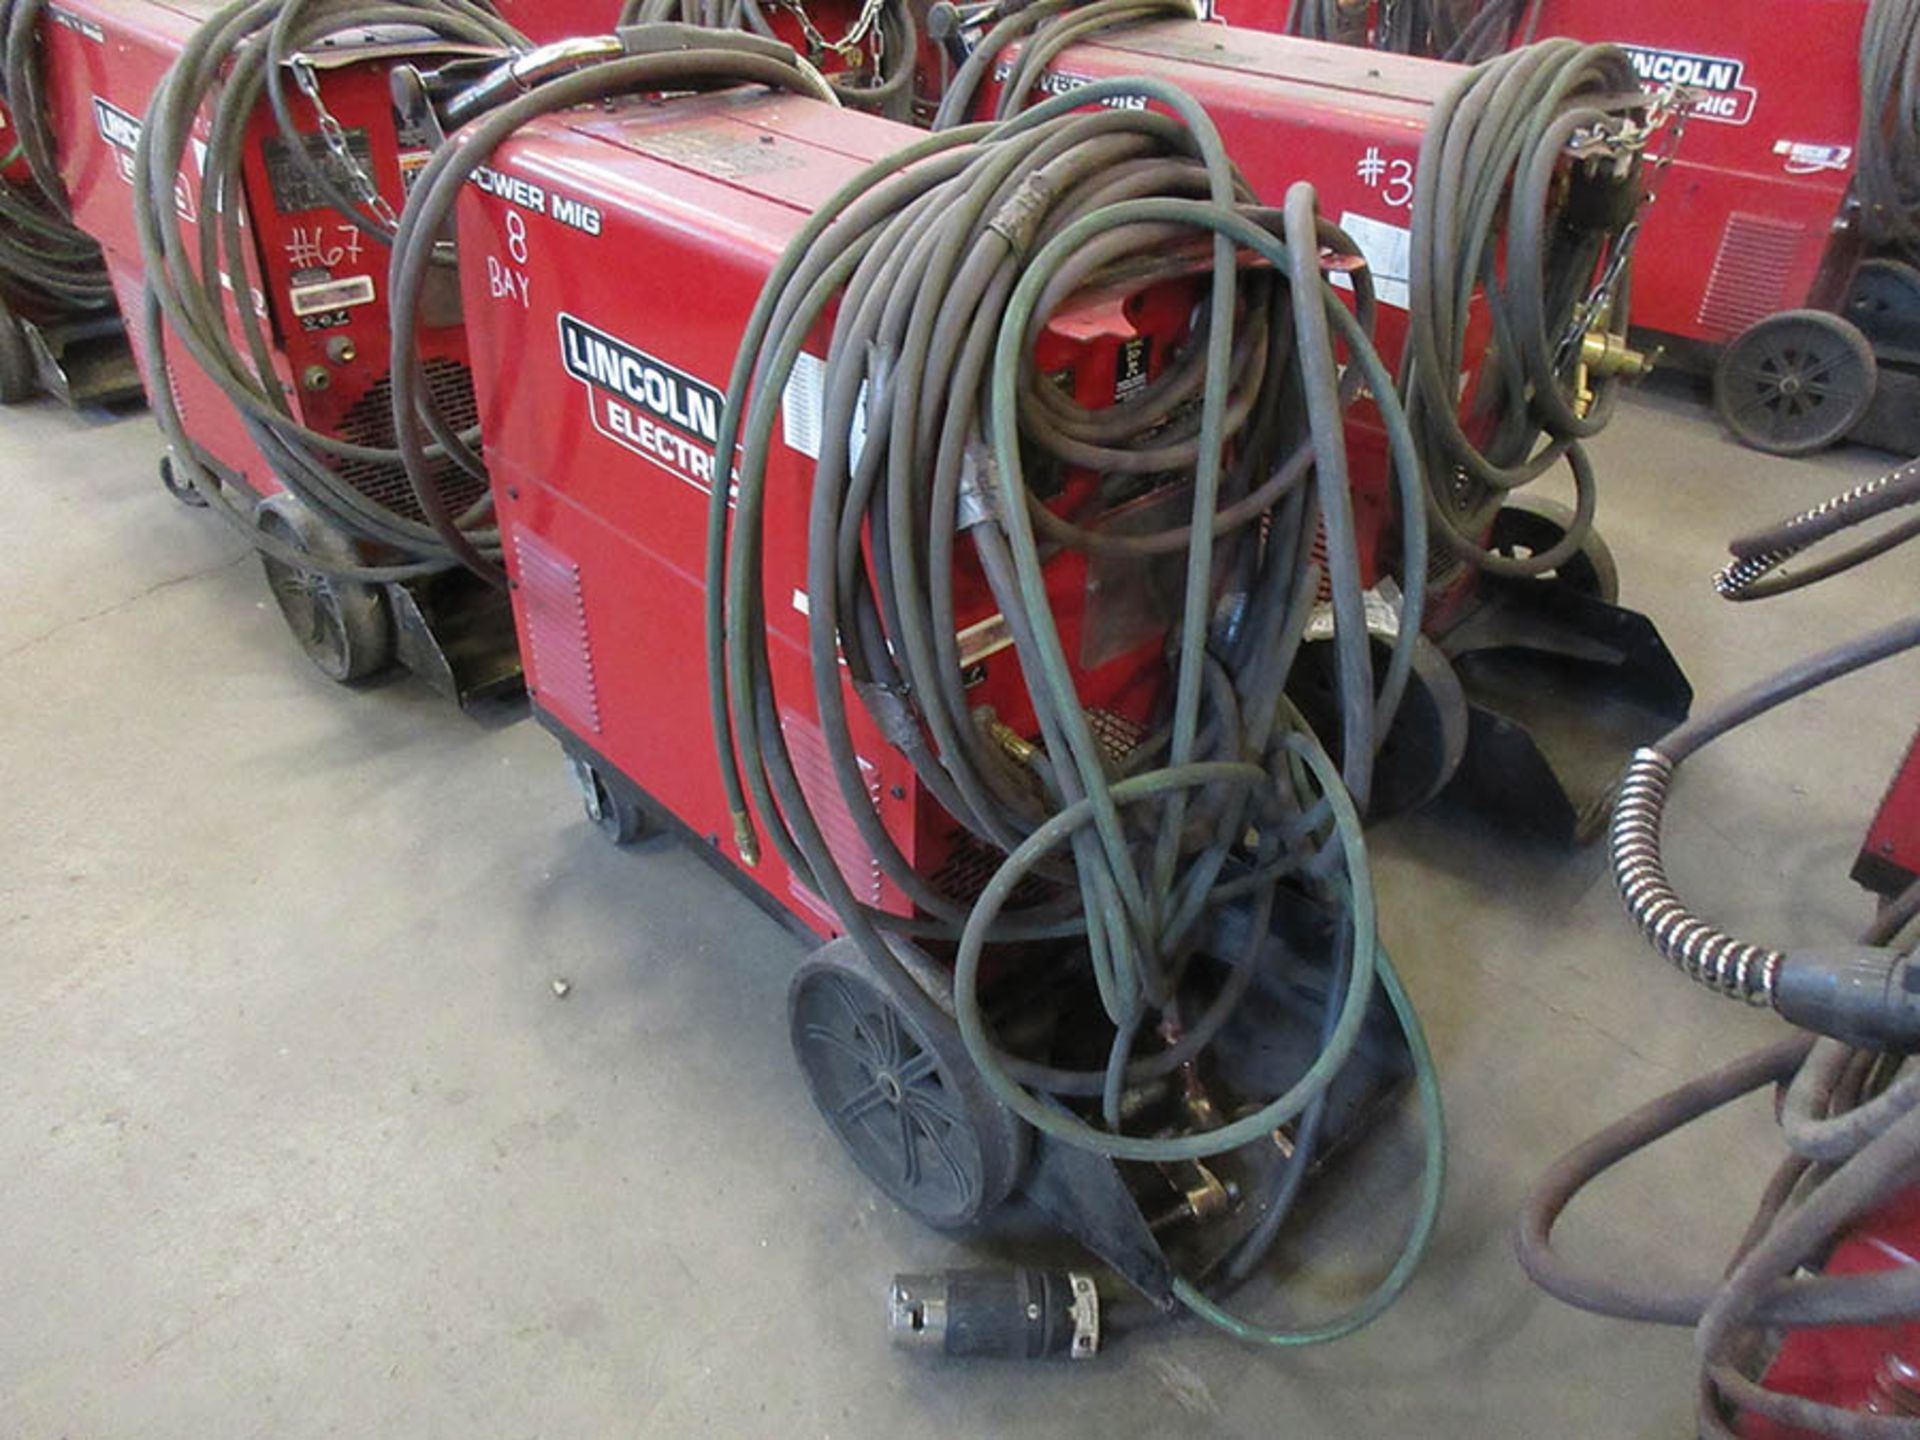 LINCOLN ELECTRIC 350MP POWER MIG WELDER WITH TWECO WELDSKILL MIG GUN, #BAY 8 - Image 2 of 3